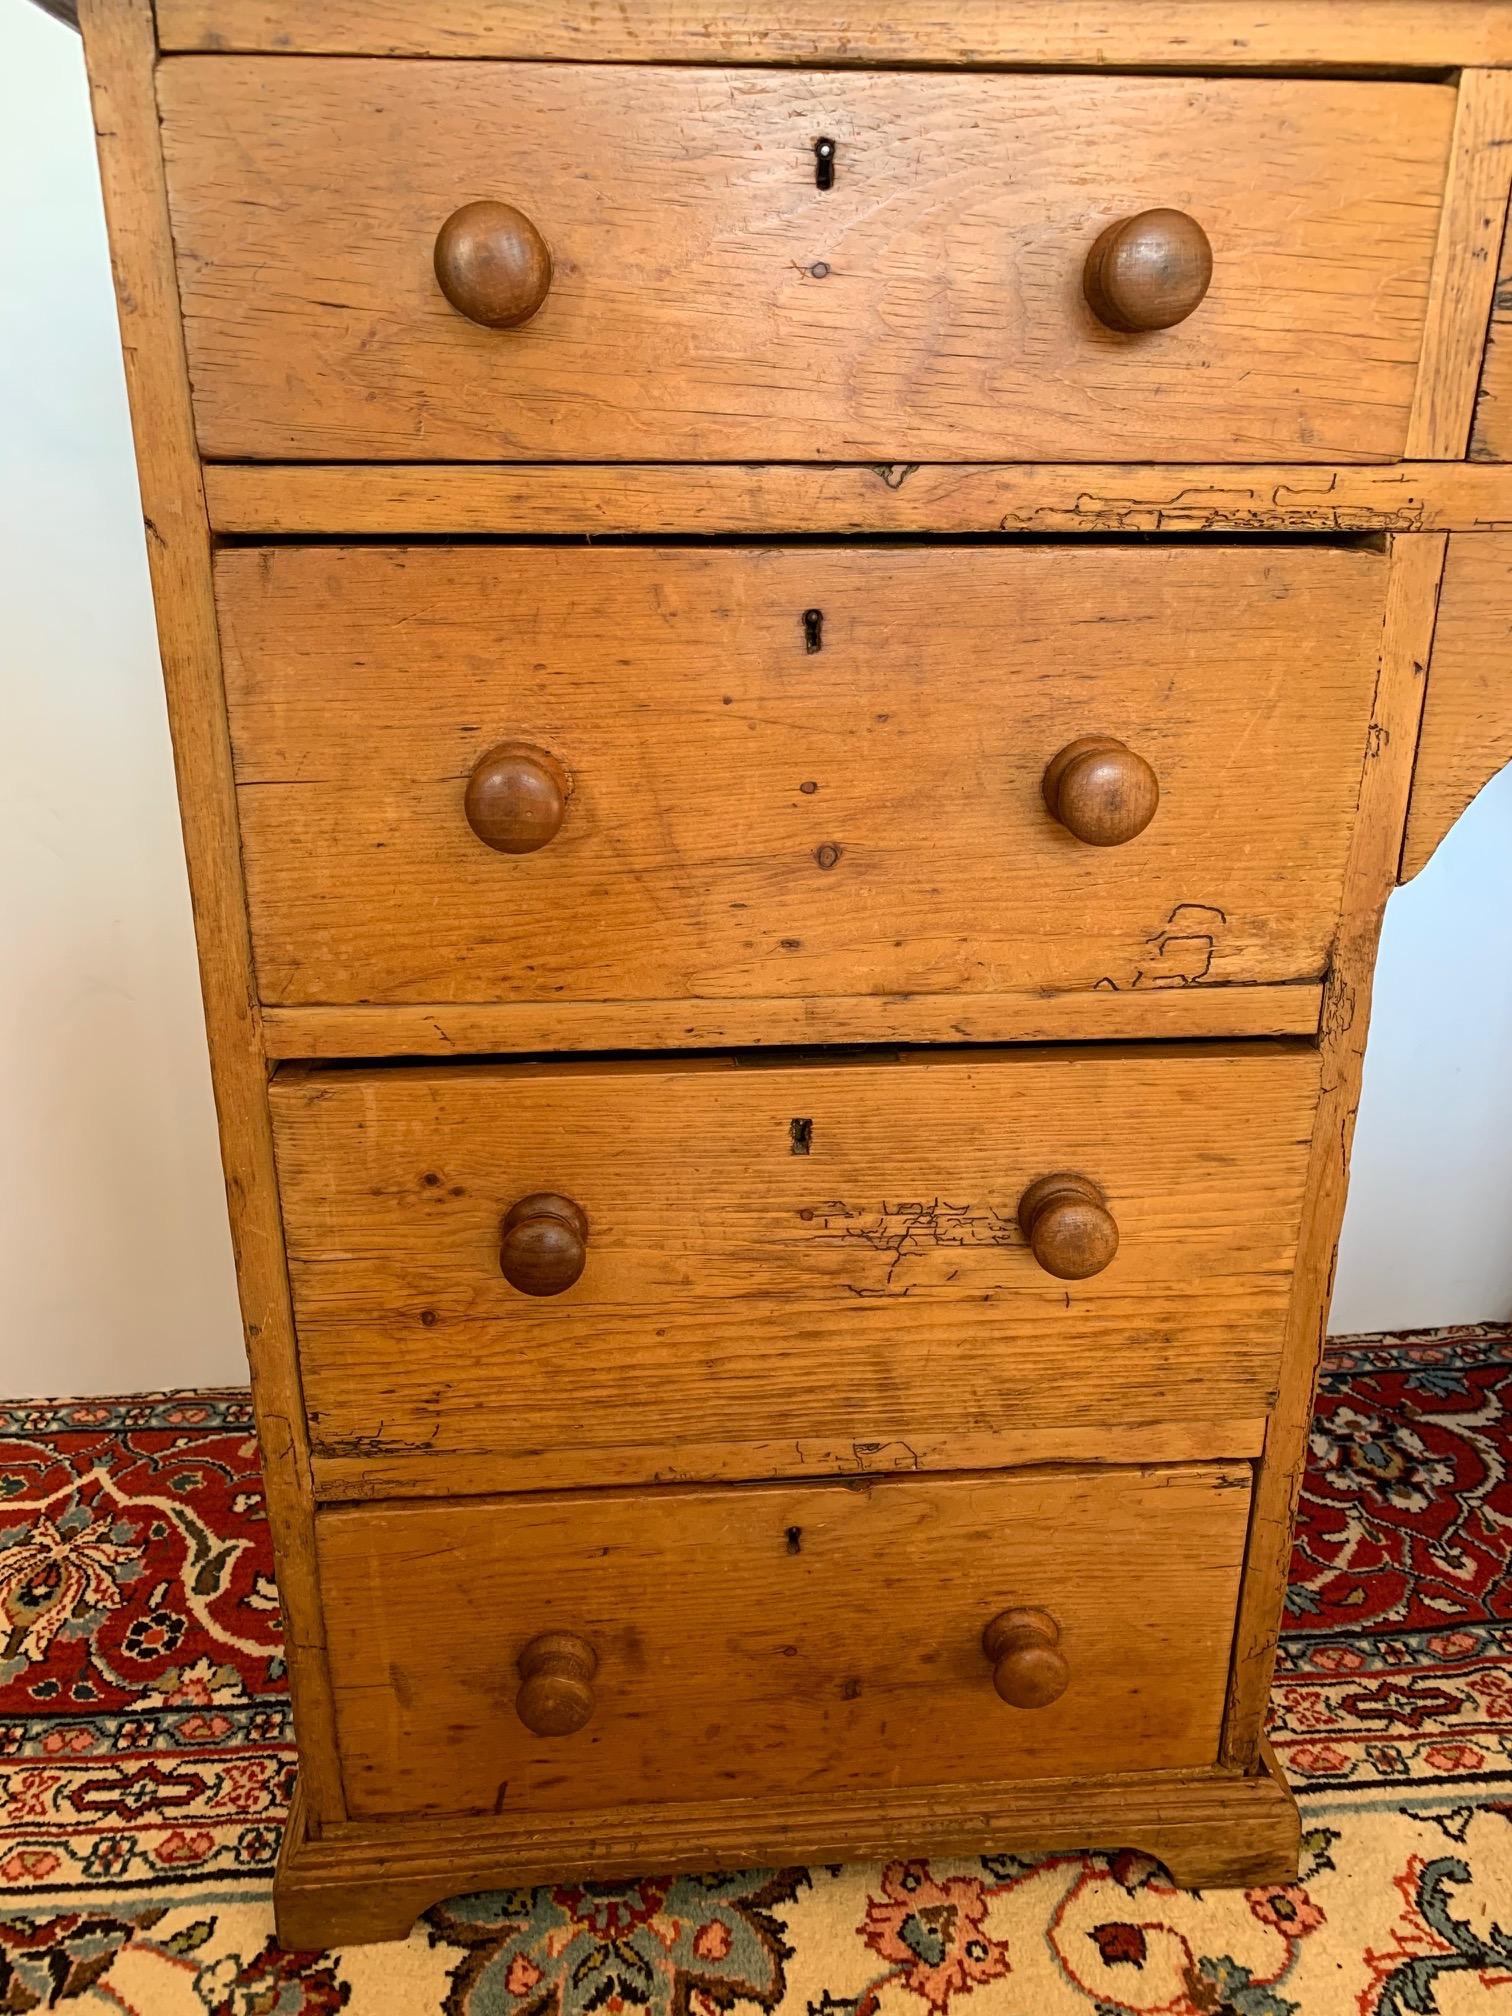 Charming antique weathered pine buffet, desk or chest of drawers. Has wonderful worming and patina.
Opening is 14.75 W 20 “ H to where the curve begins 24.25” to top
3 smaller drawers across the top
3 medium drawers on left side
2 larger, deeper